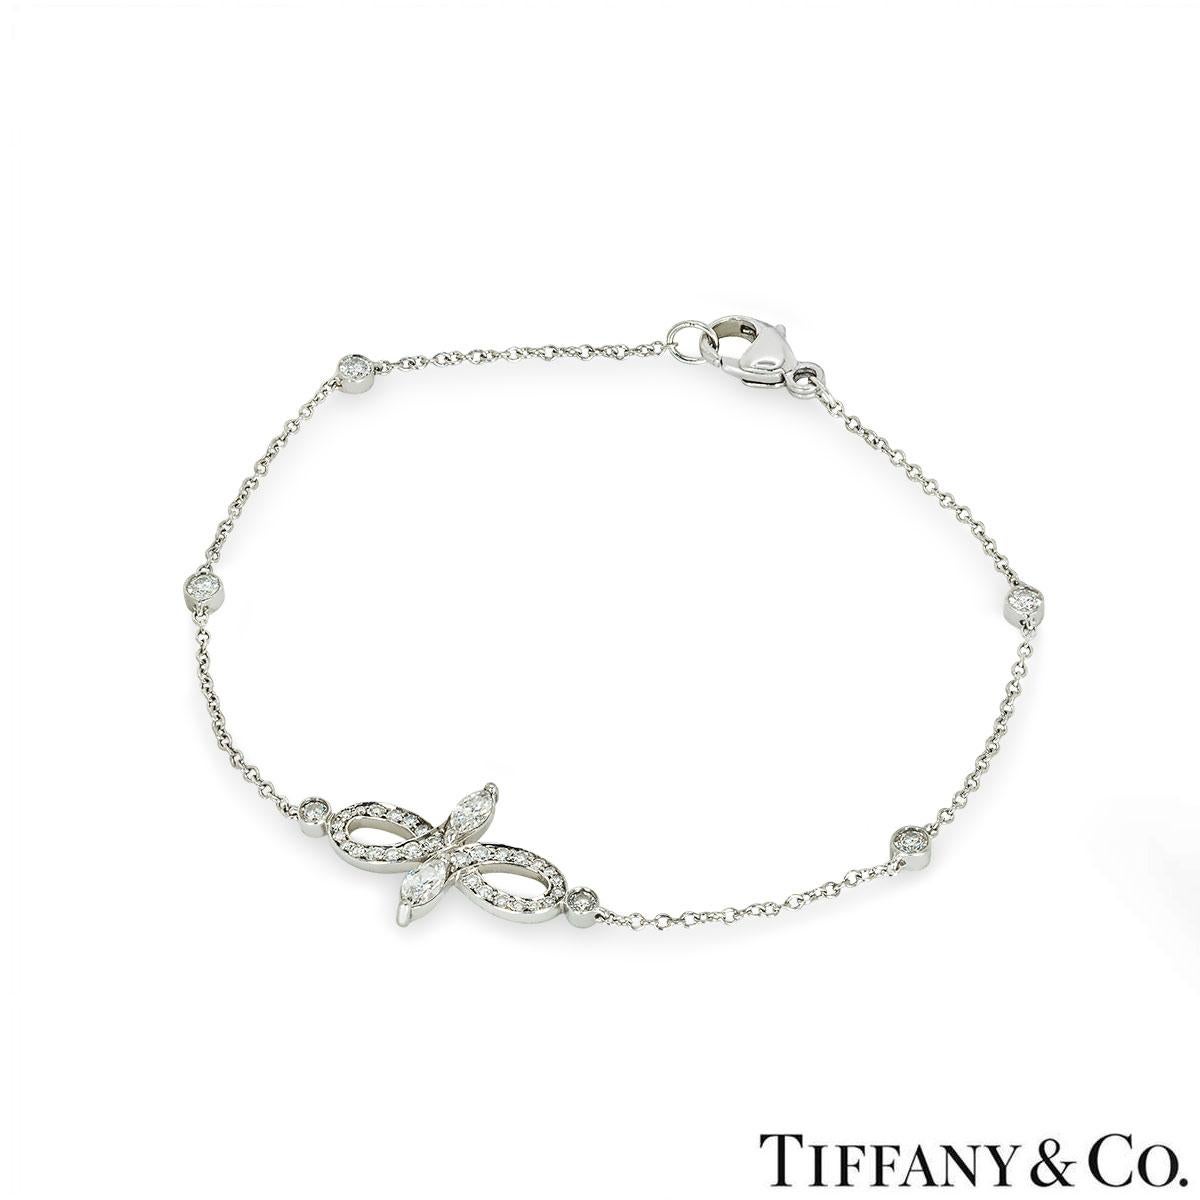 A beautiful 18k white gold Tiffany & Co. diamond bracelet from the Victoria collection. The bracelet comprises of an open work design with 2 marquise cut diamonds at each end with a total weight of 0.13ct, F colour and VS+ clarity. Complementing the